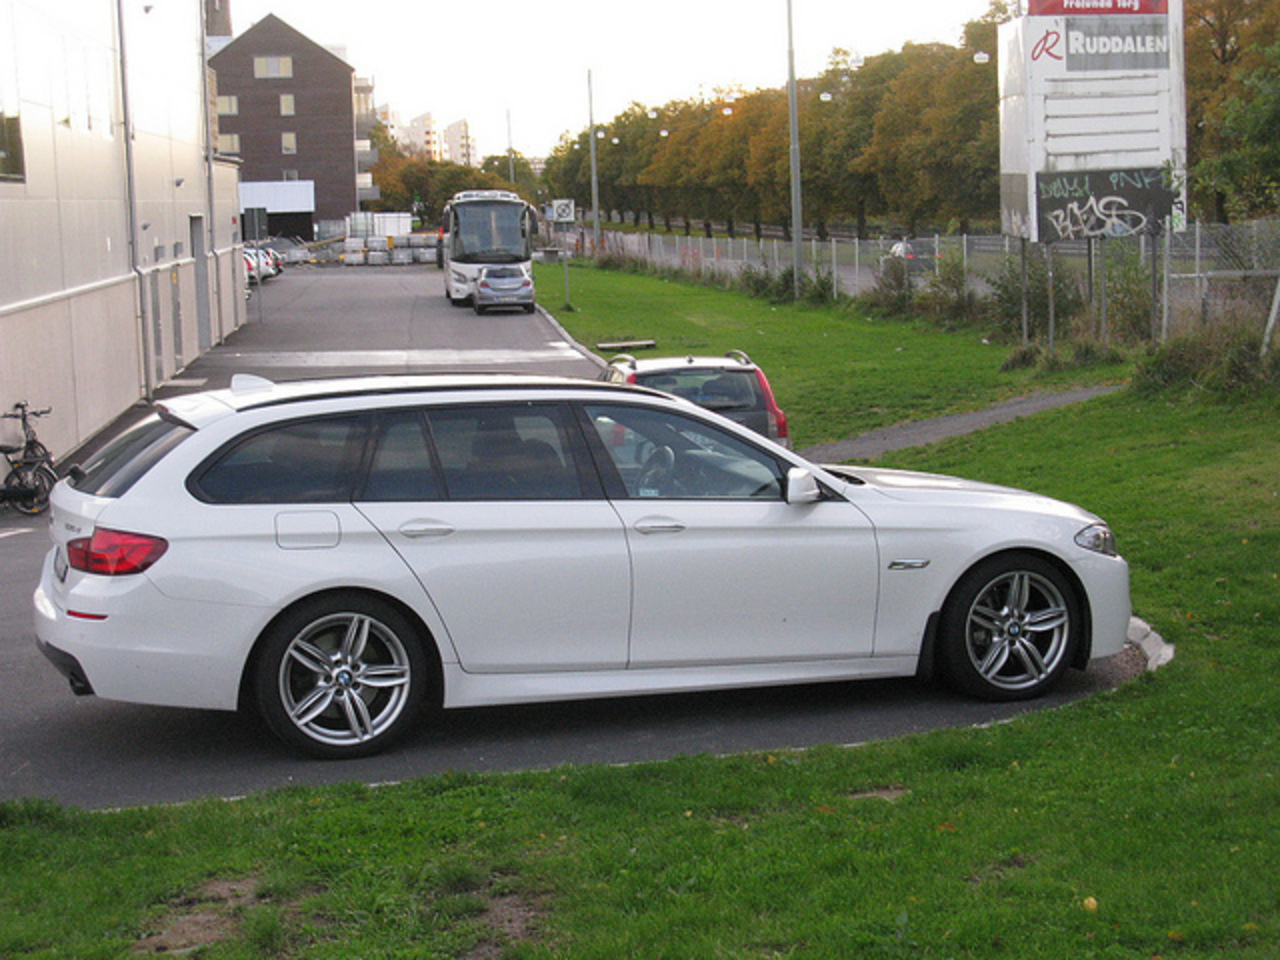 BMW 535d Touring M Sport F11 | Flickr - Photo Sharing!